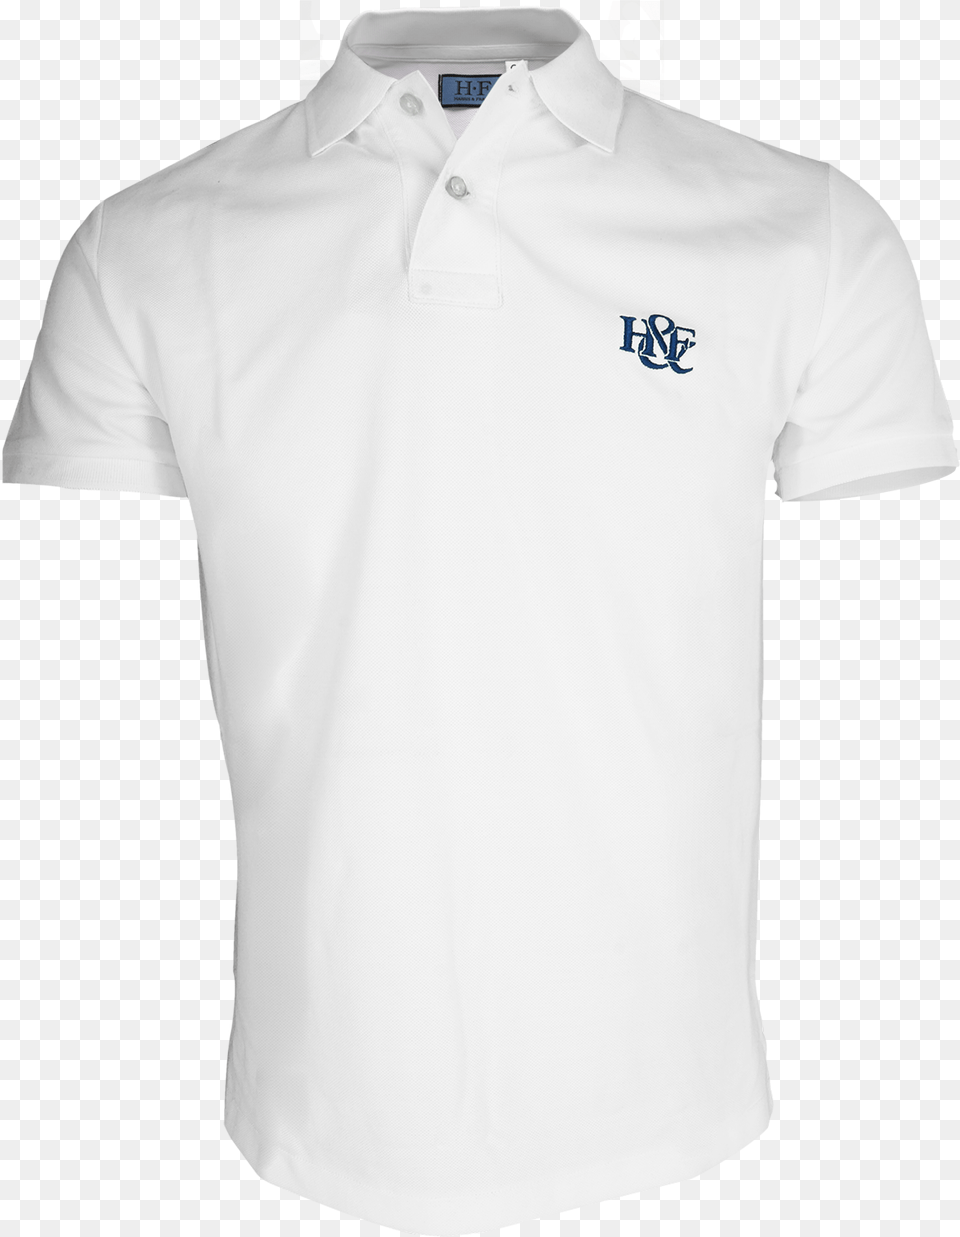 Polo Blancaharris And Frank Polo Not Specified Playera Tipo Polo Blanca, Clothing, Shirt, T-shirt Png